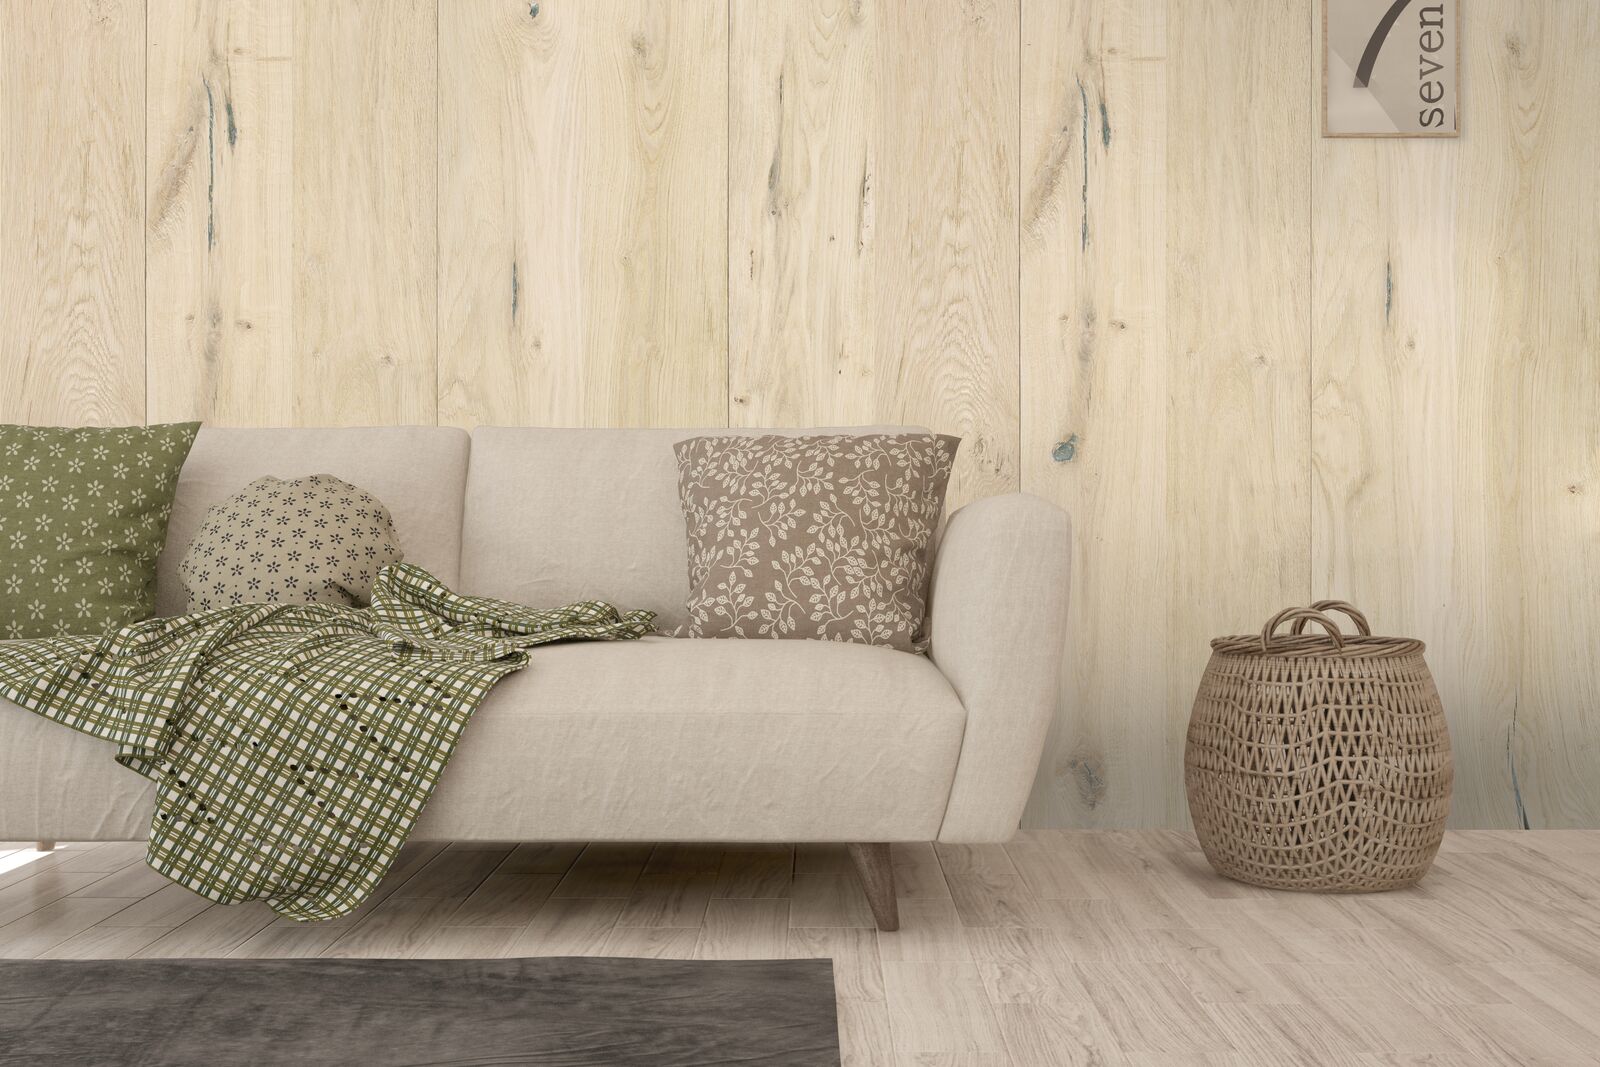 Sofa and basket in front of Scandi Oak wall panel